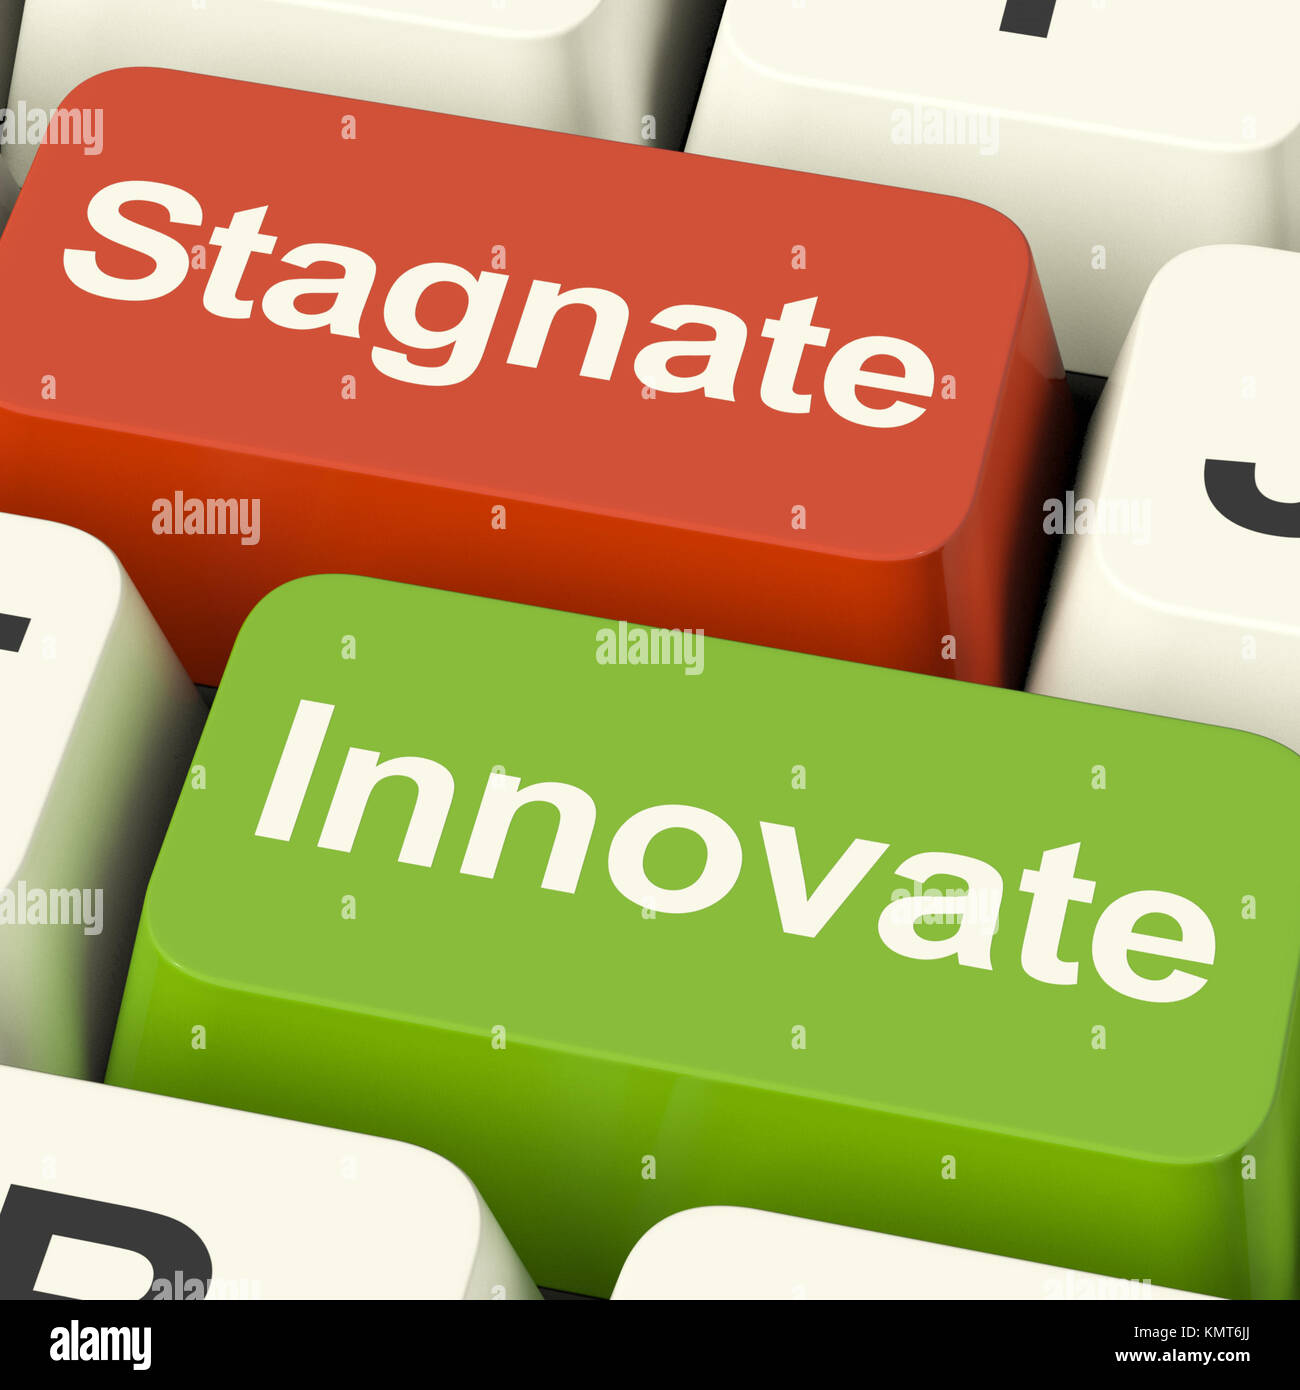 Stagnate Innovate Computer Keys Shows Choice Of Growth And Advancement Or Stagnation Stock Photo